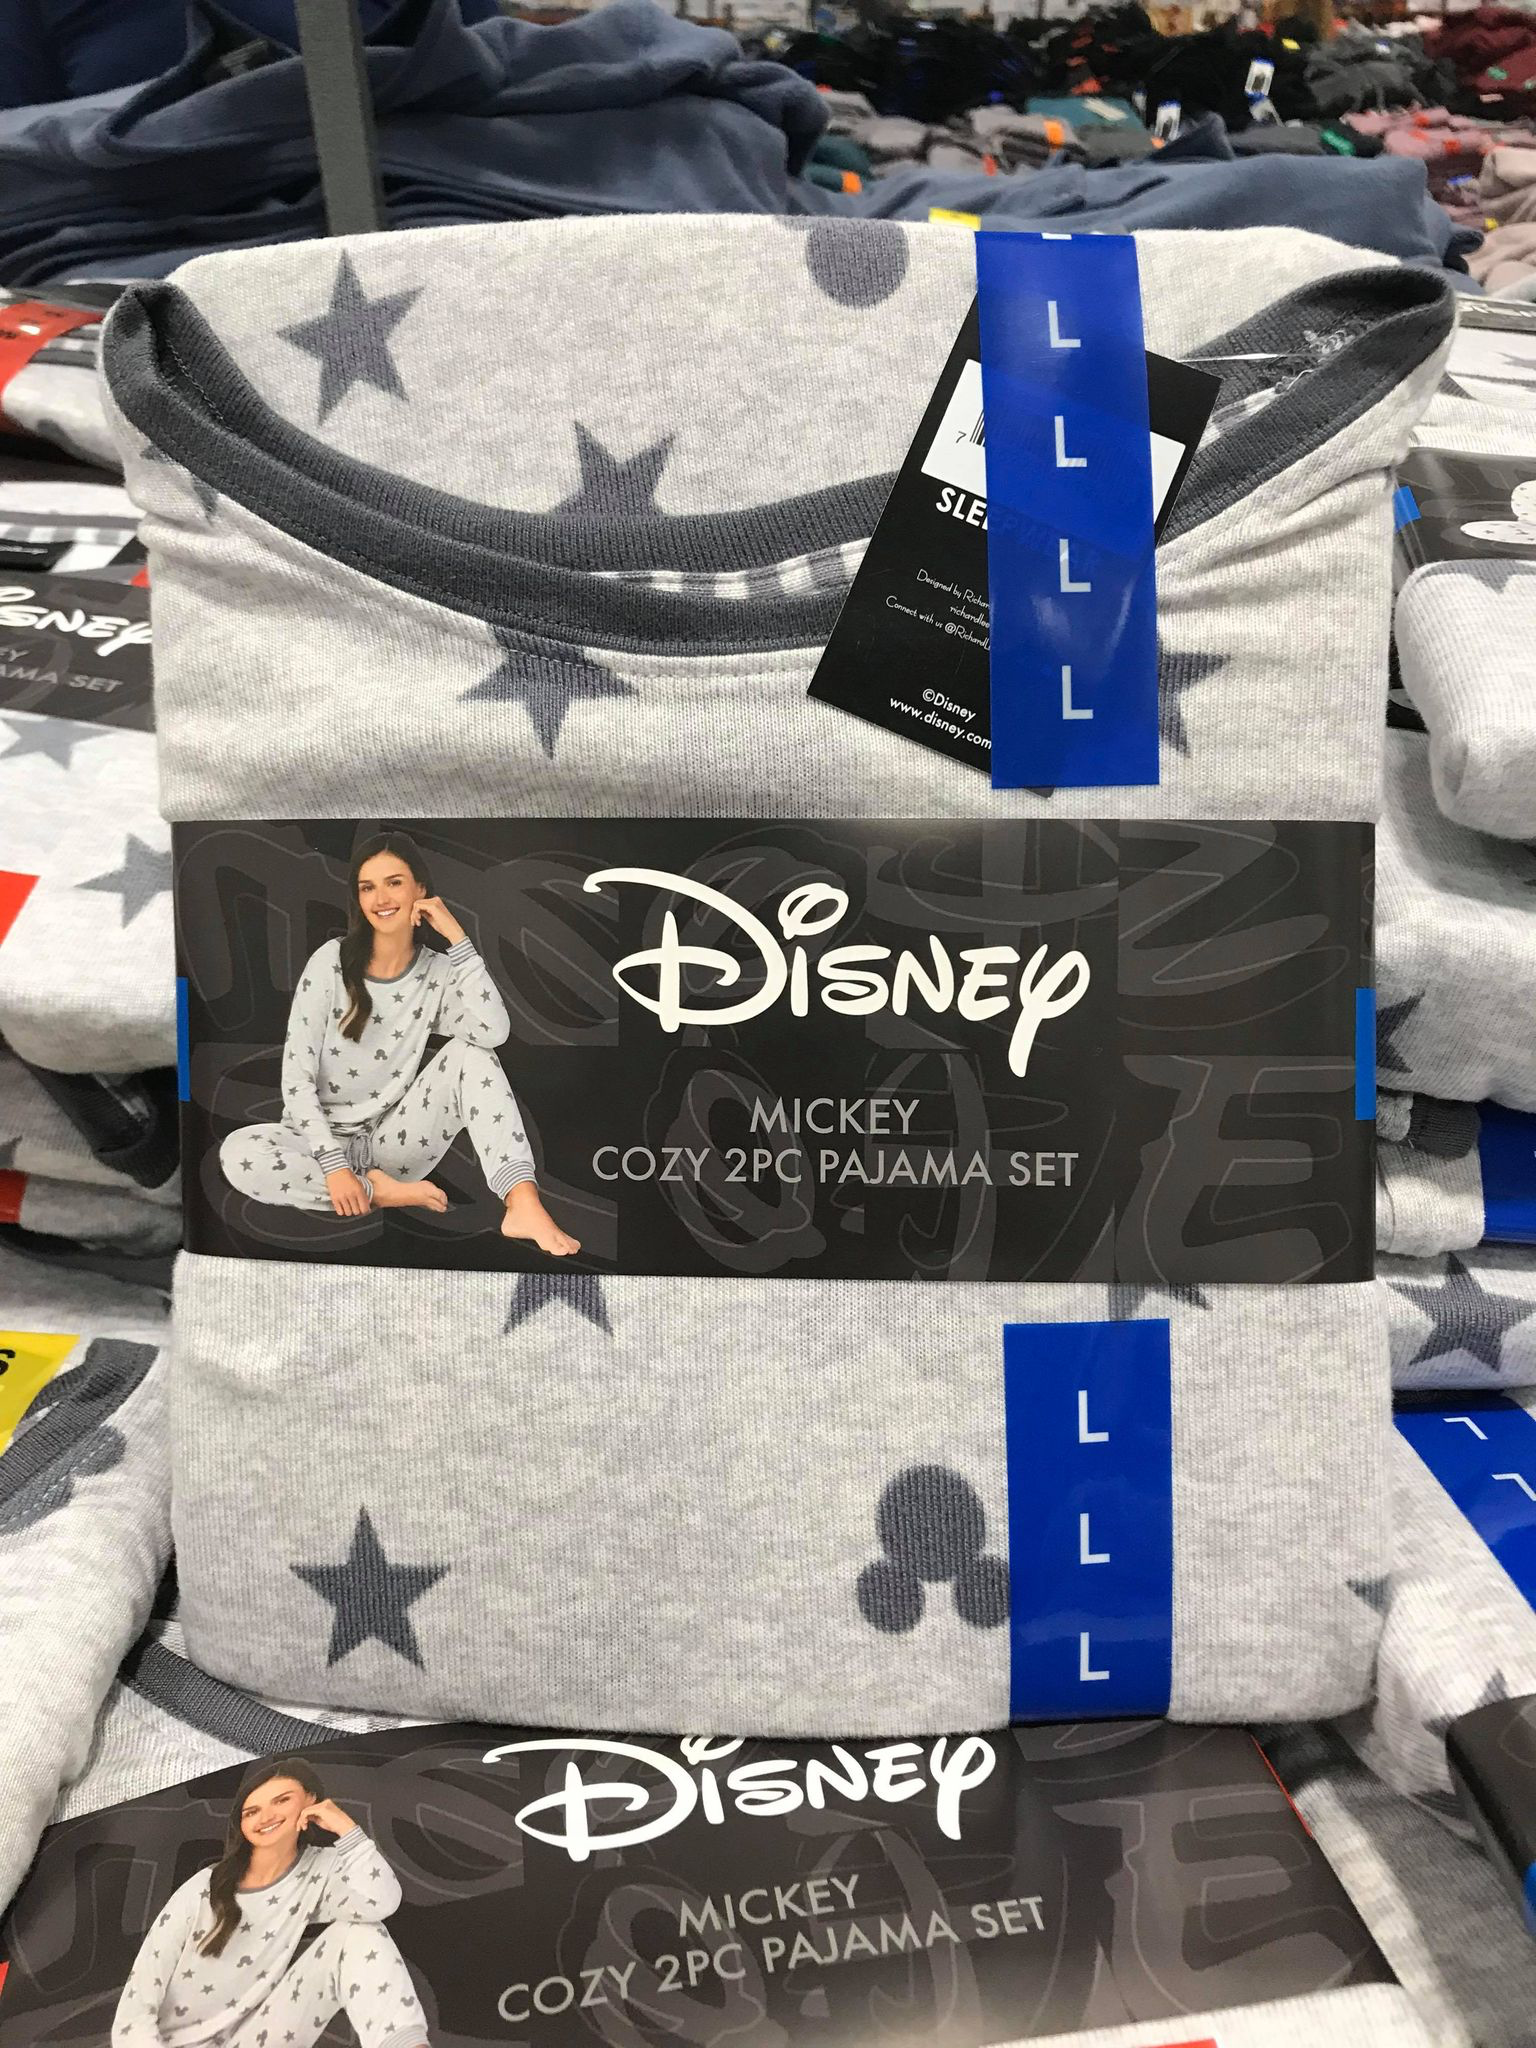 New Magically Soft Winter Pajamas Are At Costco! - clothes 